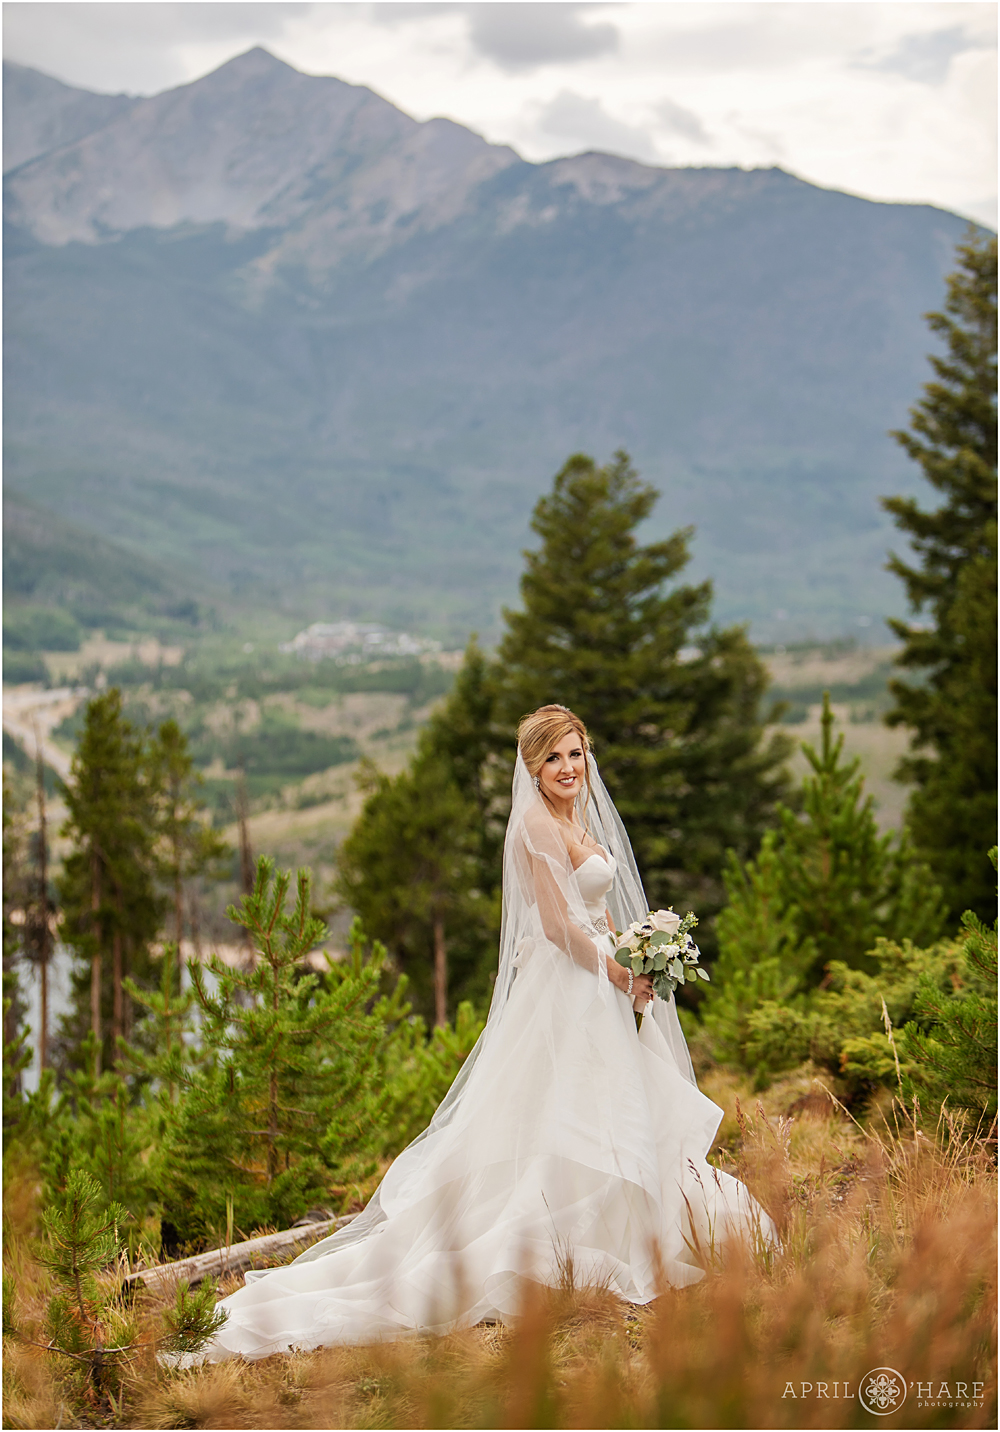 Pretty bridal portrait at Sapphire Point on a rainy day in Colorado